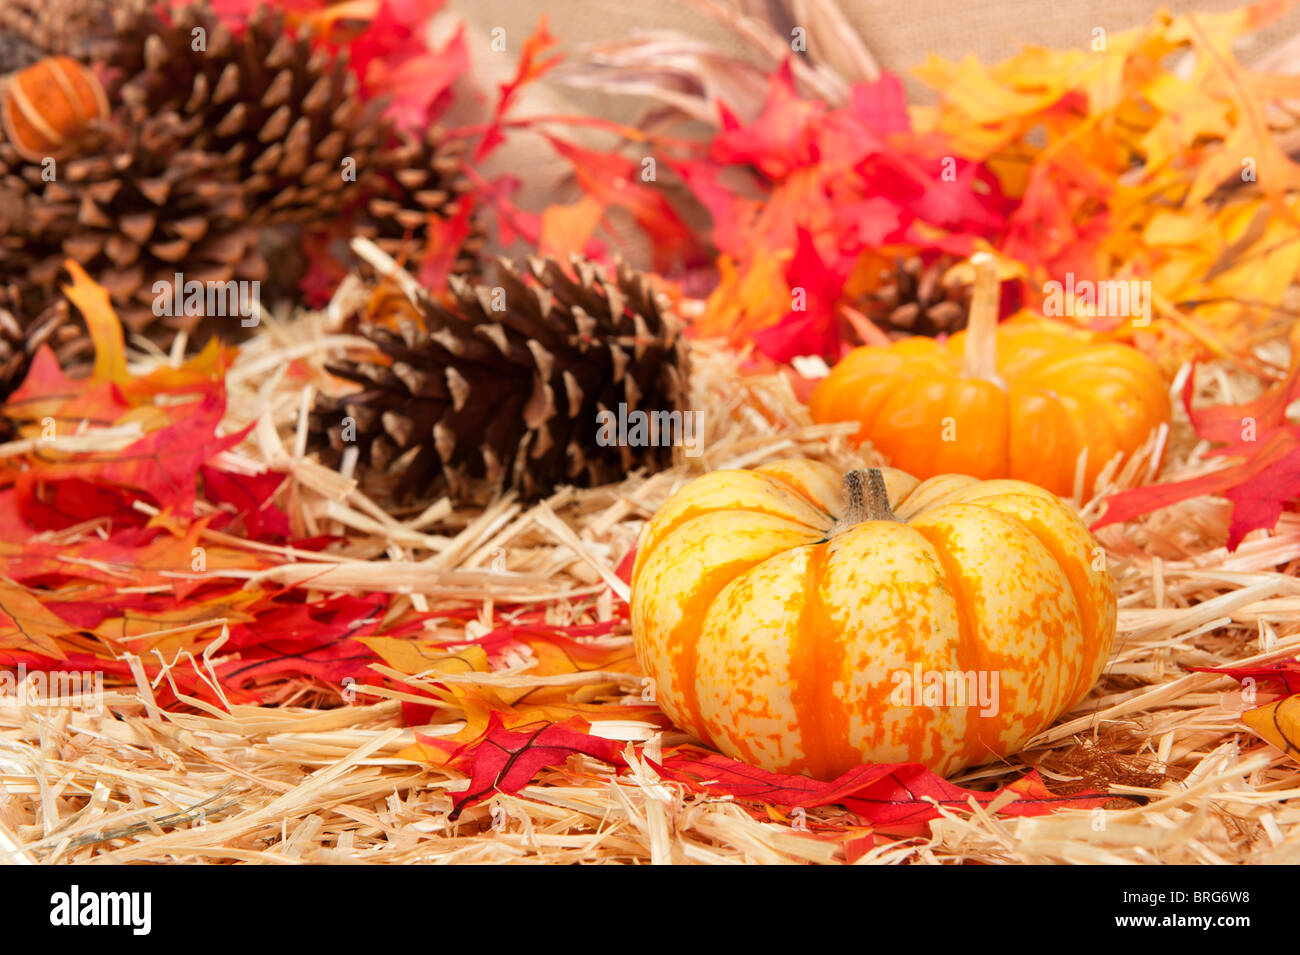 An Autumn holiday theme with pumpkins, corn, pine cones and autumn leaves on a hay base with focus on the pumpkin Stock Photo